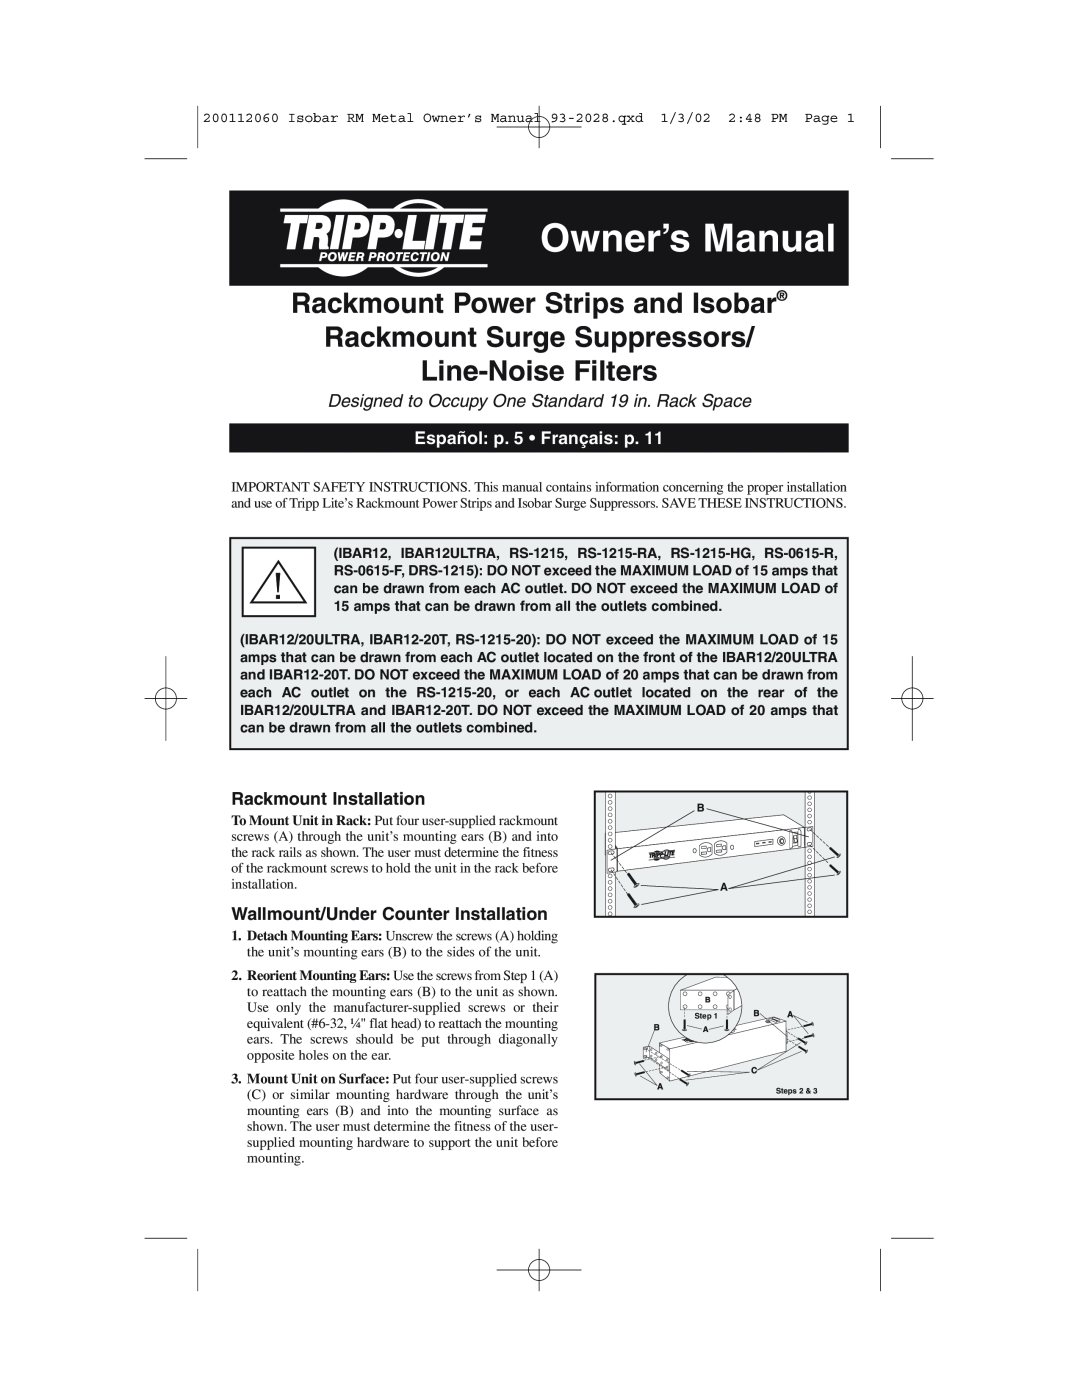 Tripp Lite IBAR 12, RS-1215-HG owner manual Owner’s Manual, Rackmount Power Strips and Isobar Rackmount Surge Suppressors 